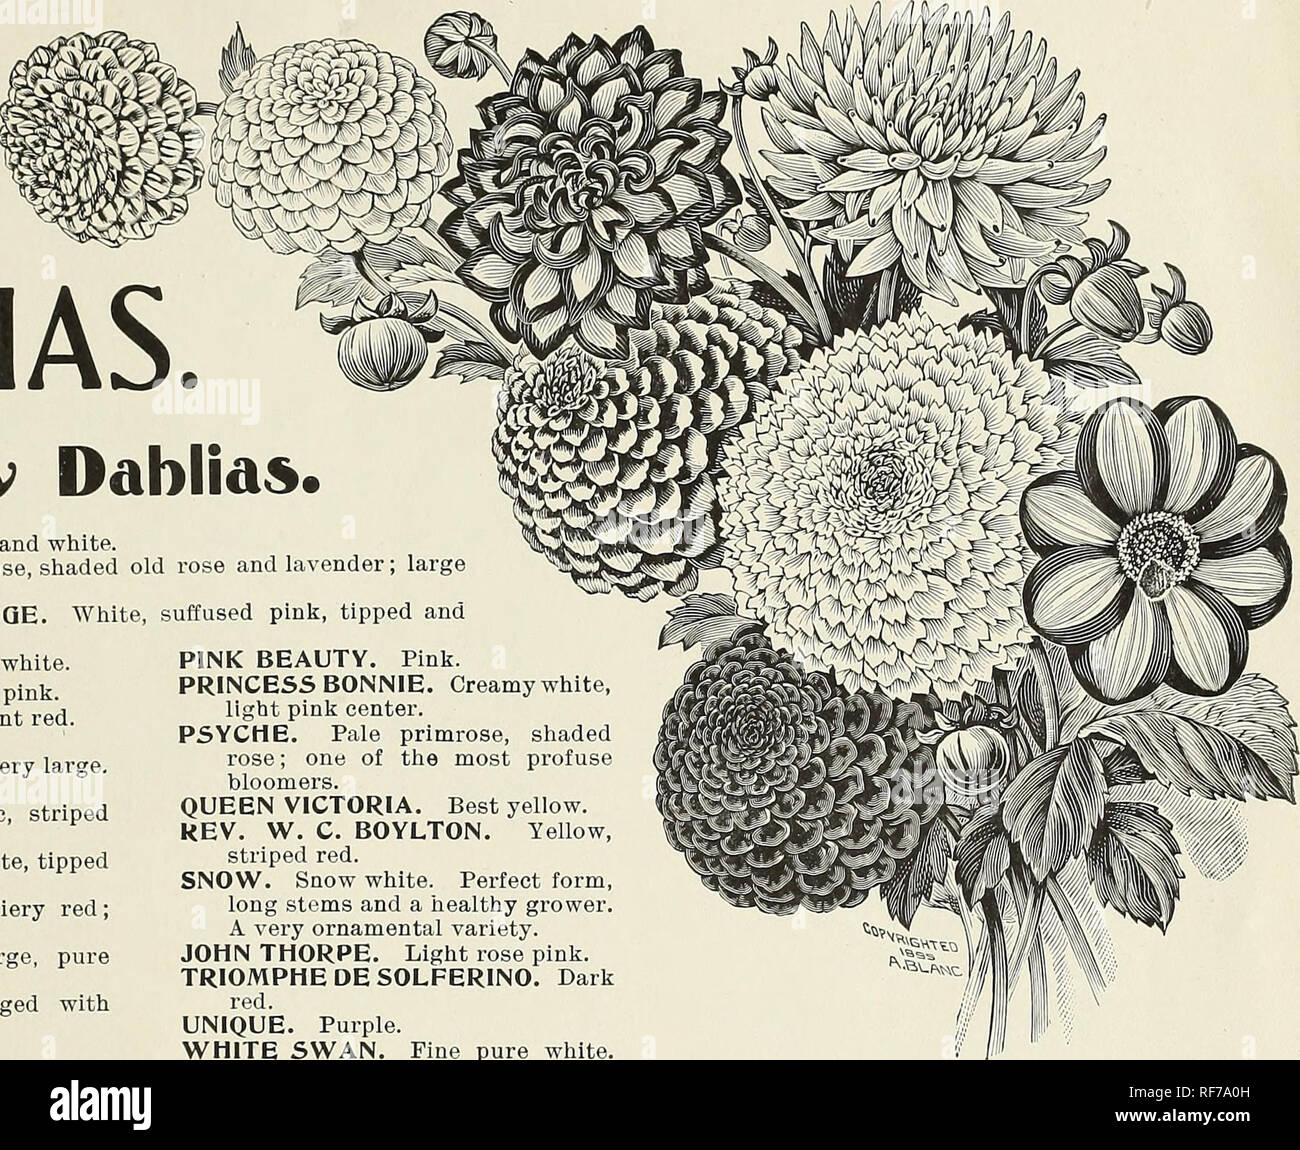 . Wholesale catalogue of seeds, bulbs and plants. Nursery stock New York (State) New York Catalogs; Vegetables Seeds Catalogs; Flowers Seeds Catalogs; Bulbs (Plants) Catalogs; Plants, Ornamental Catalogs. CLtCAS &amp; BODDINGTON CO. NEW YORK 5 Wholesale Catalogue DAHLIAS. Show Dahlias. AMERICAN FLAG. Red and white. ARABELLA. Pale primrose, shaded old rose and lavender; large size and form. DUCHESS OF CAMBRIDGE. White, suffused pink, tipped and edged with purple. ELEGANCE. Red, tipped white. ETHEL CORNORE. Pale pink. GLOWING COAL. Brilliant red. GEM. Dark red. HECTOR. Orange-red. Very large. On Stock Photo